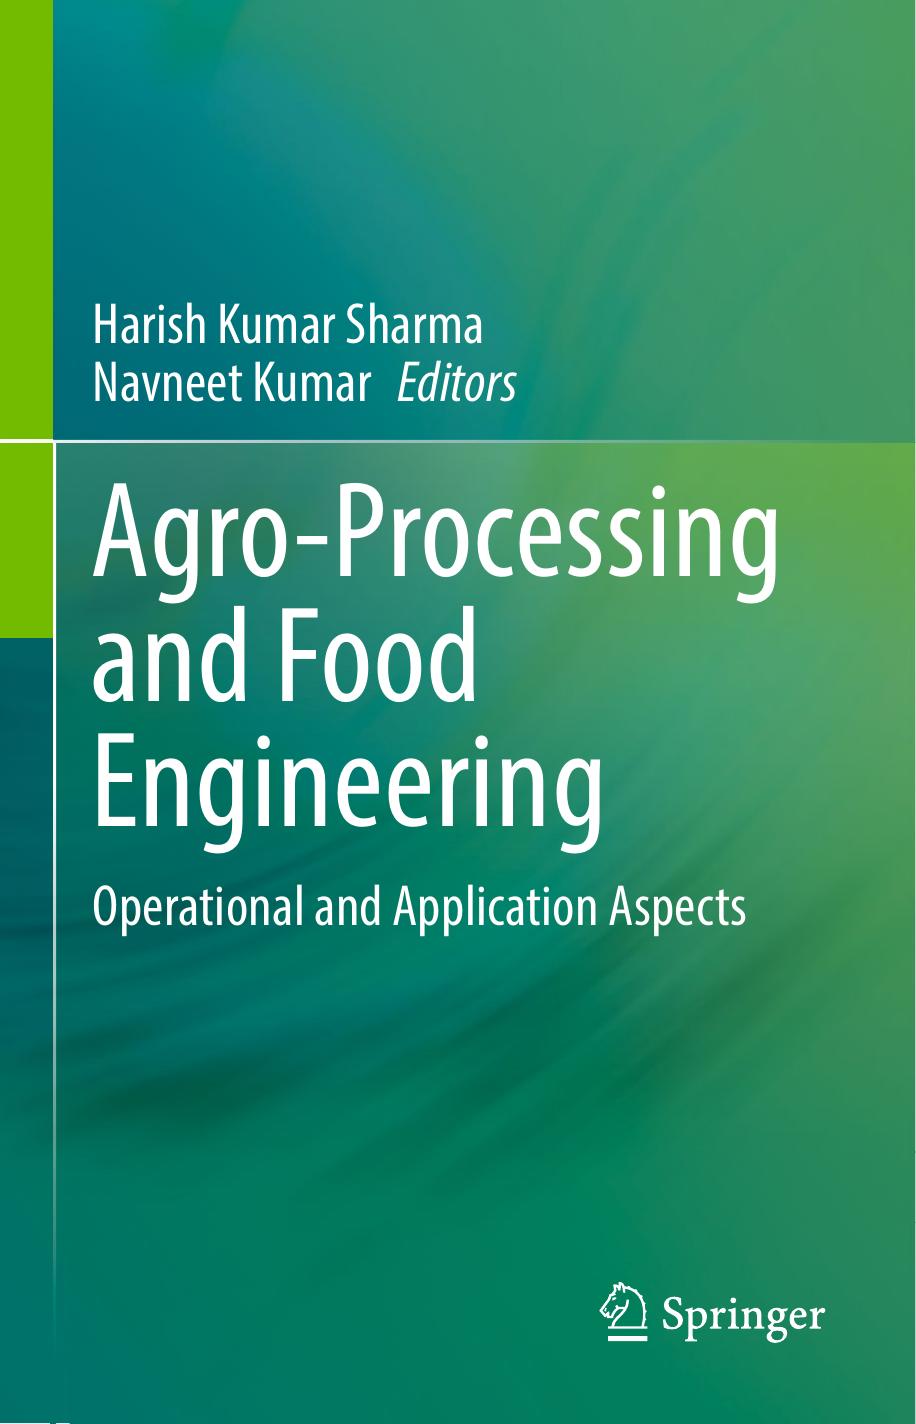 Agro-Processing and Food Engineering  Operational and Application Aspects-Springer (2022)